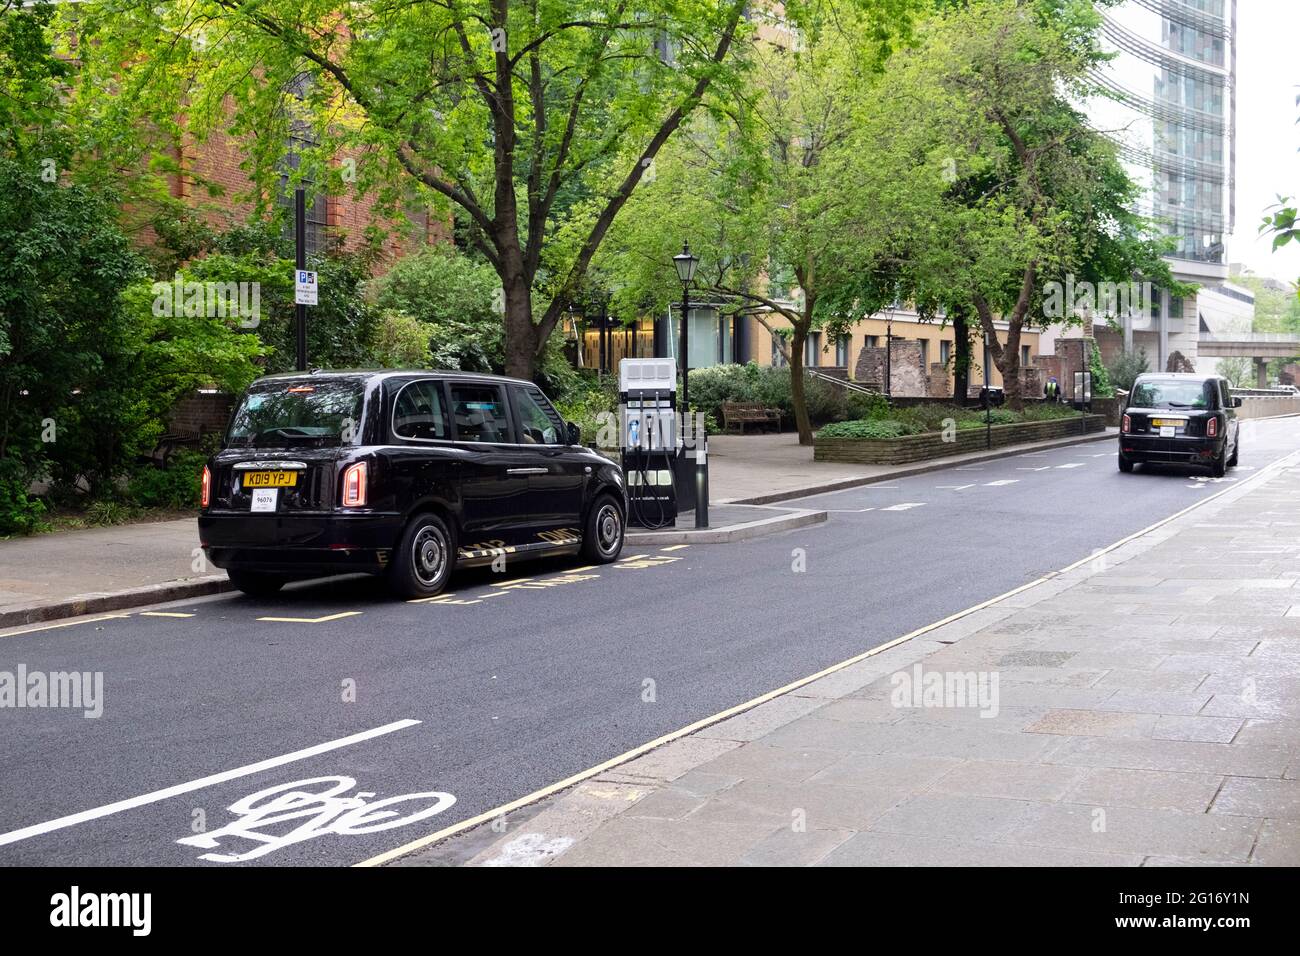 Black London taxi cab electric charging station juice point on road in the City of London England UK  KATHY DEWITT Stock Photo